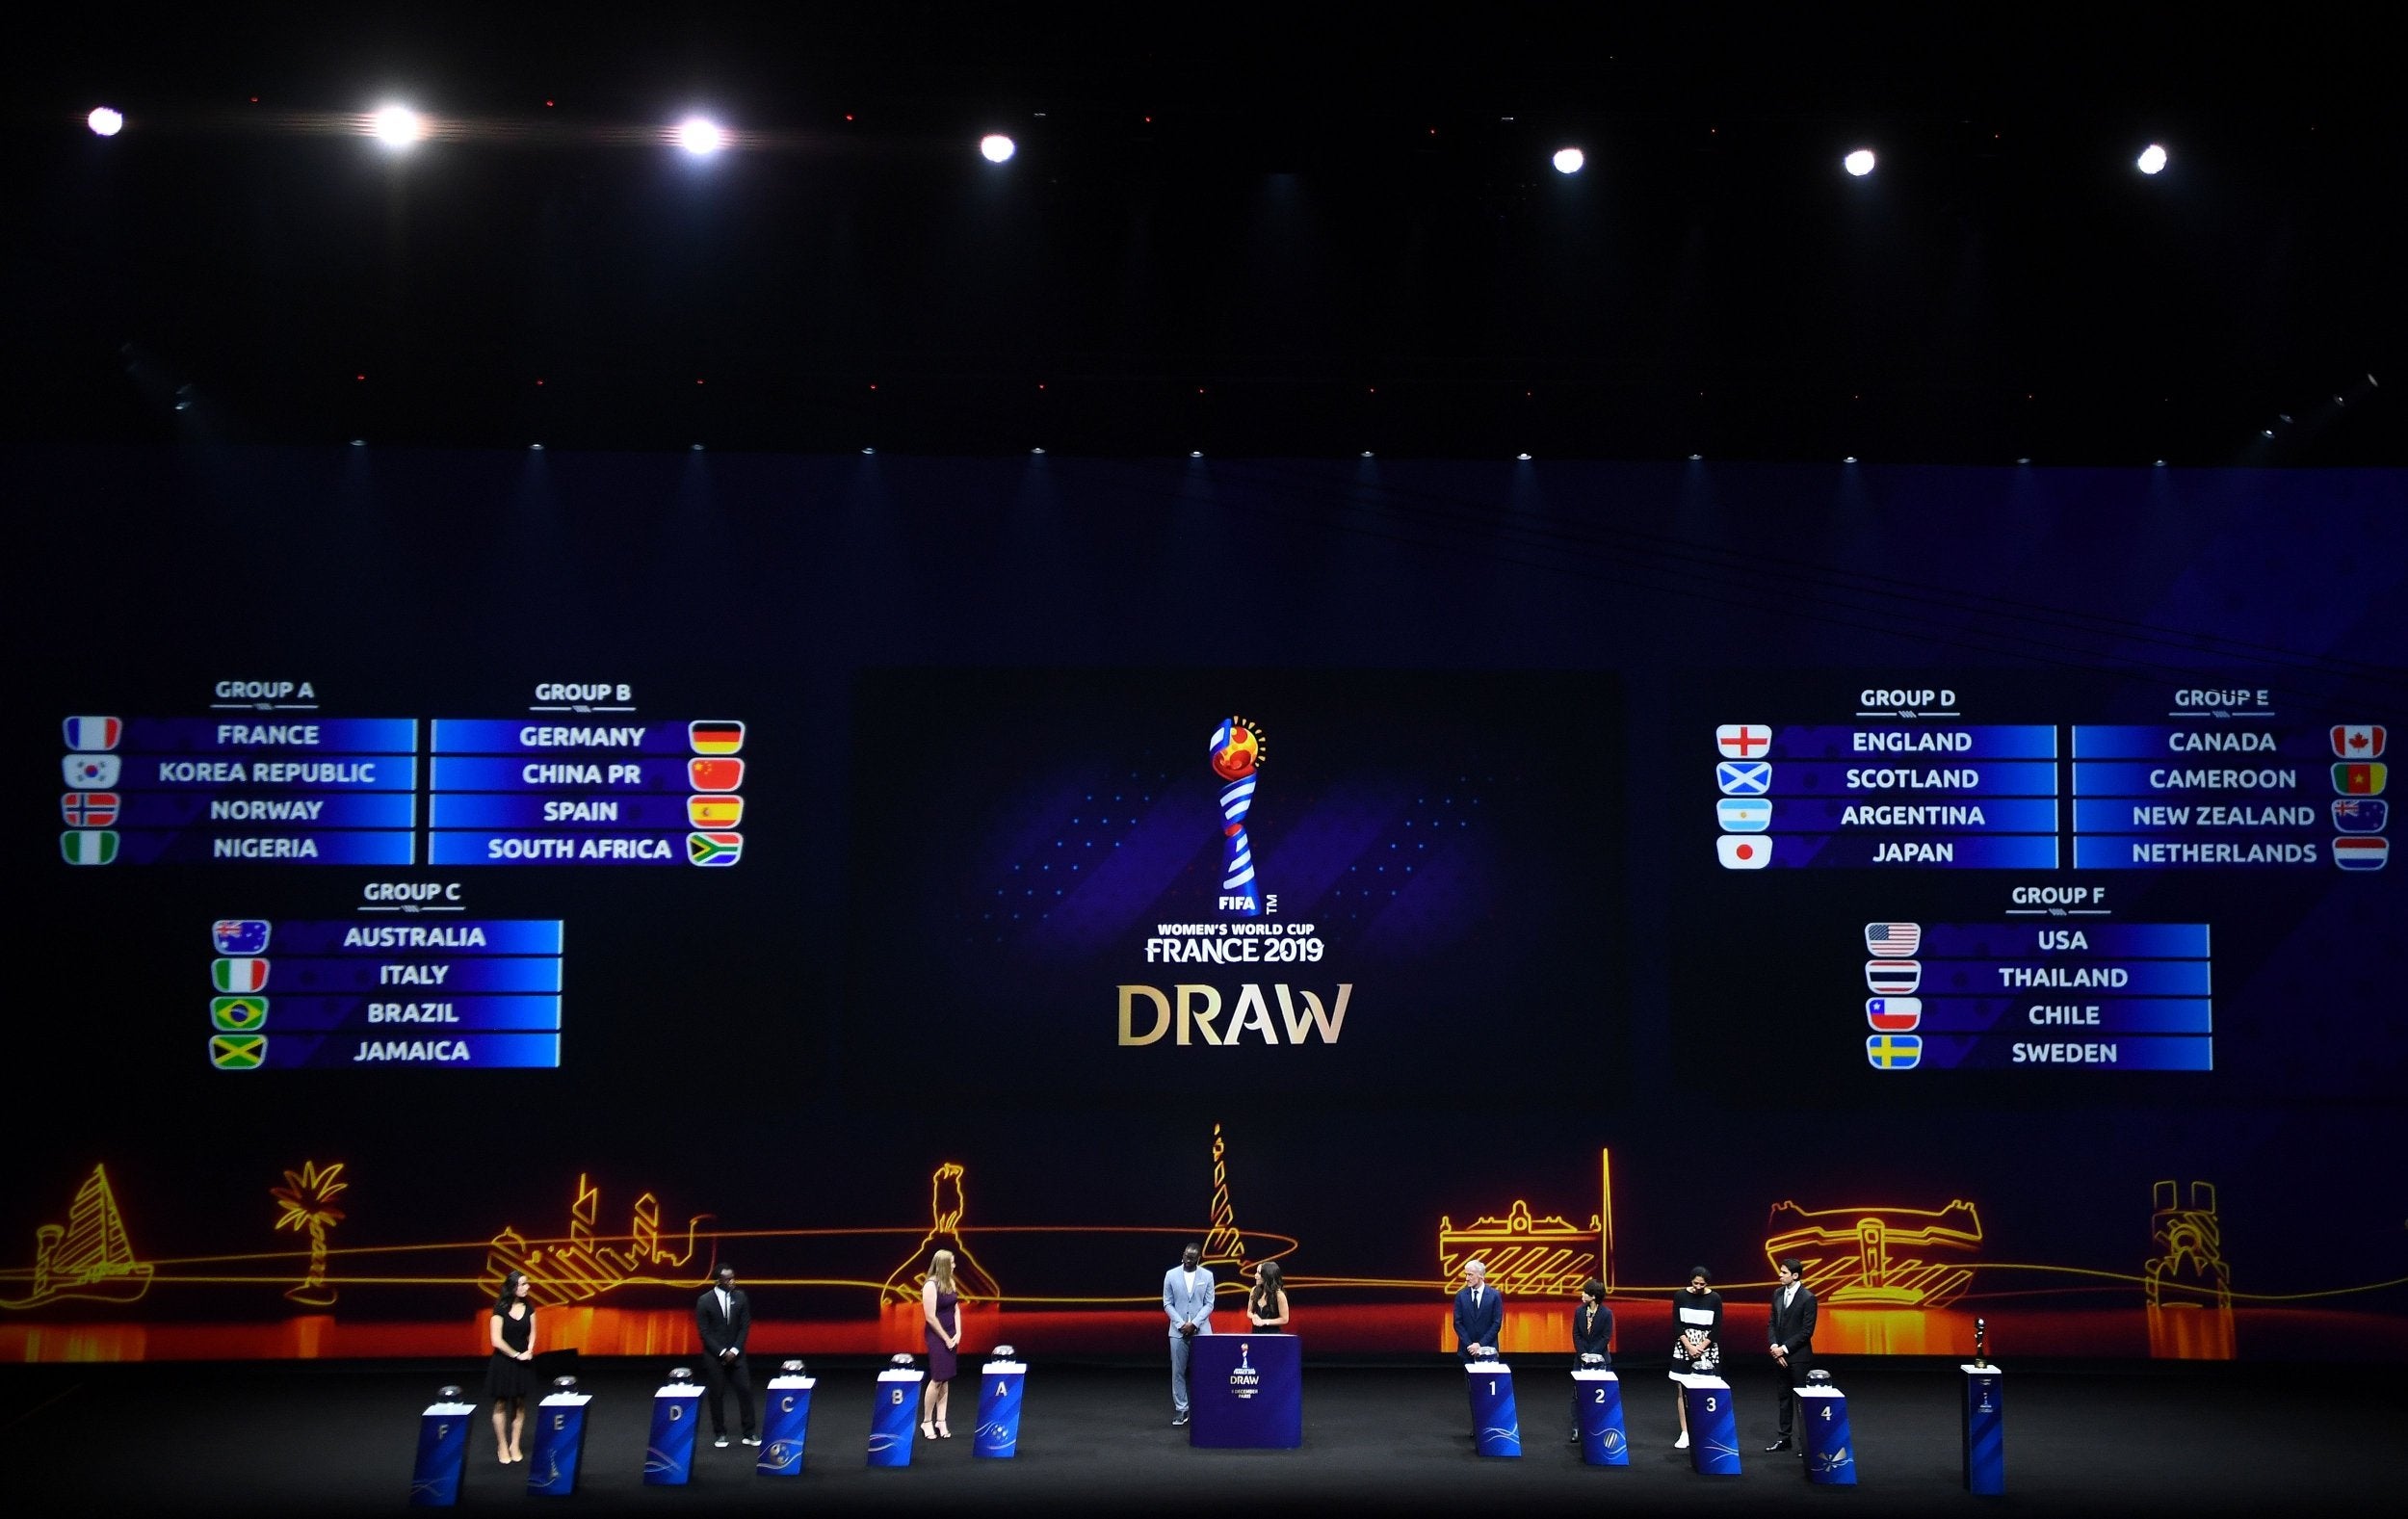 The draw took place in host nation France